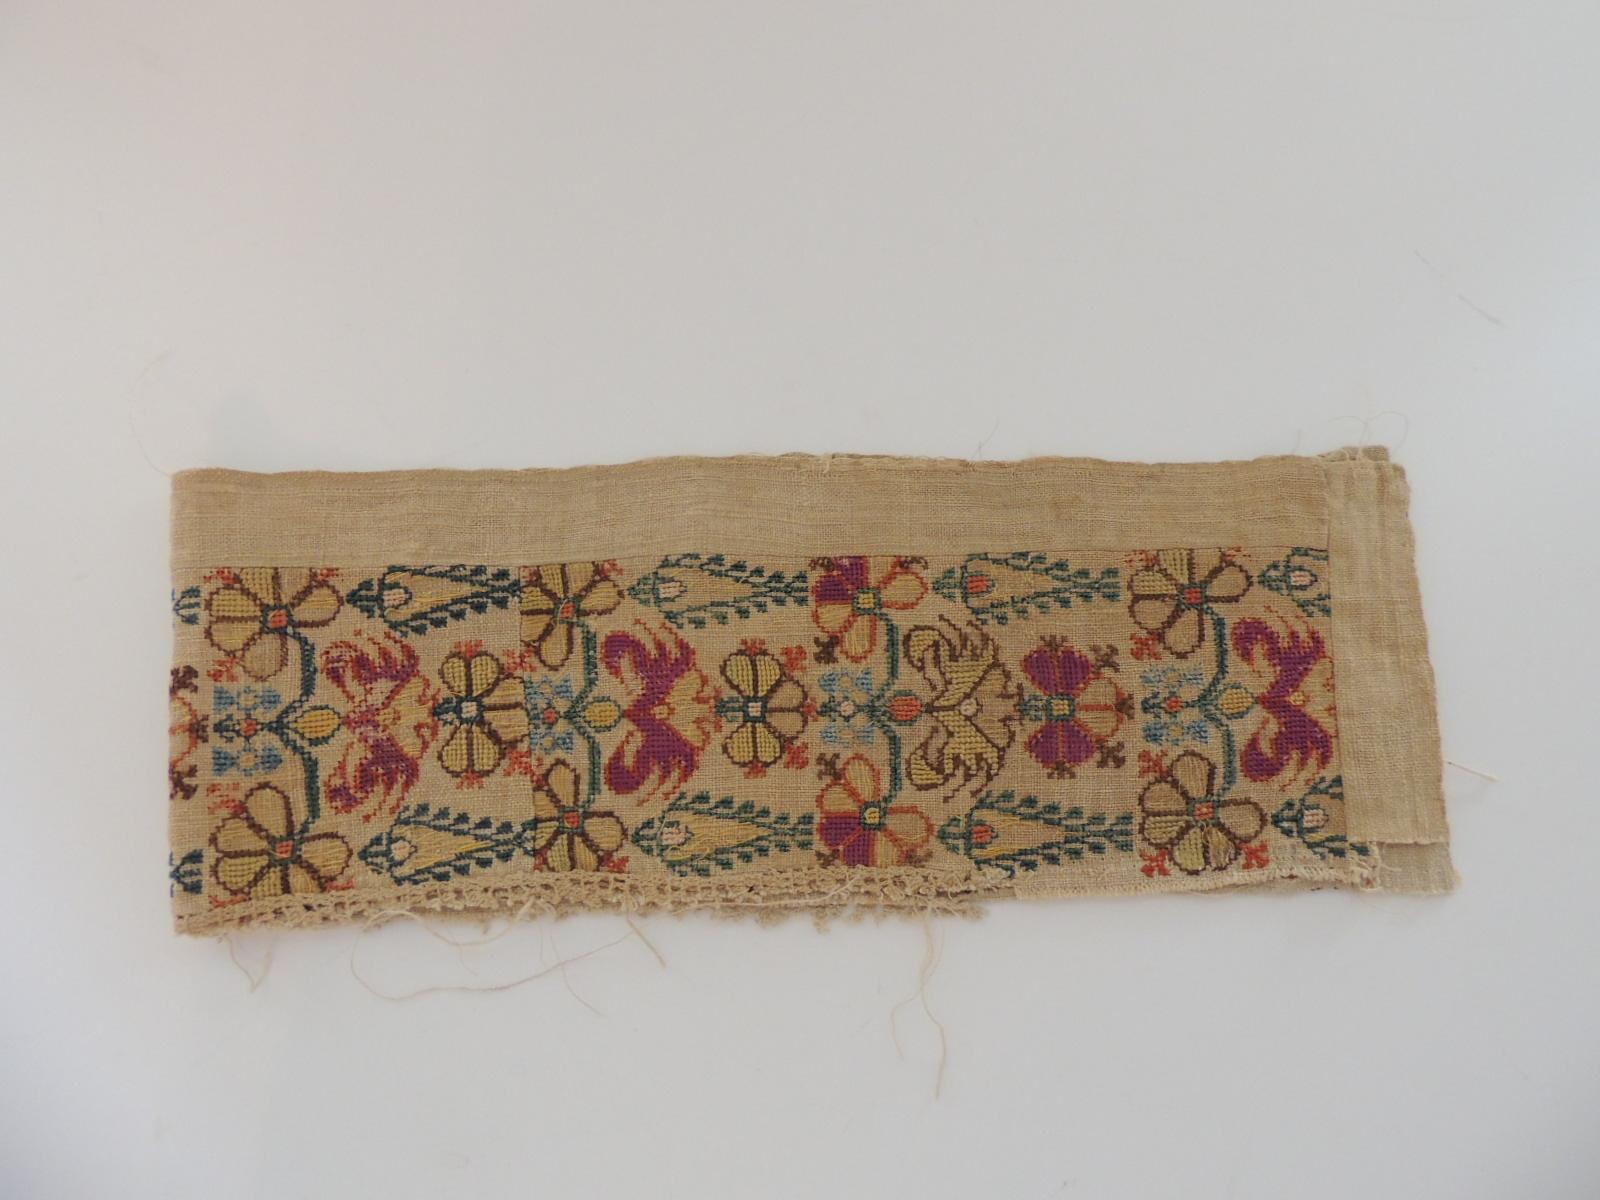 Antique embroidered Turkish textile fragment.
Floral pattern embroidery silk threads on linen.
In shades of red, orange, green, blue, brown and purple.
Ideal to use on the center of a pillow or upholstery.
Size: 31